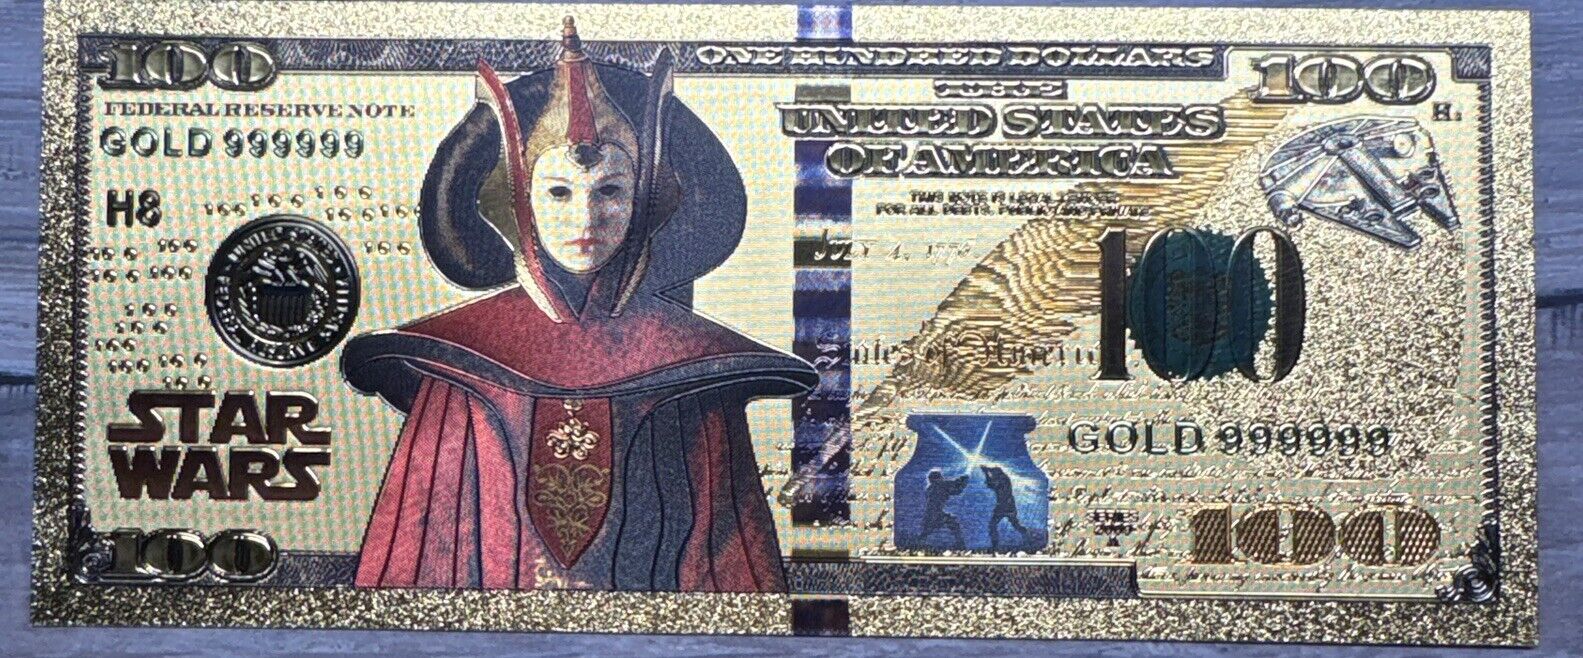 24k Gold Plated Queen Padme Amidala Star Wars Banknote Collectible